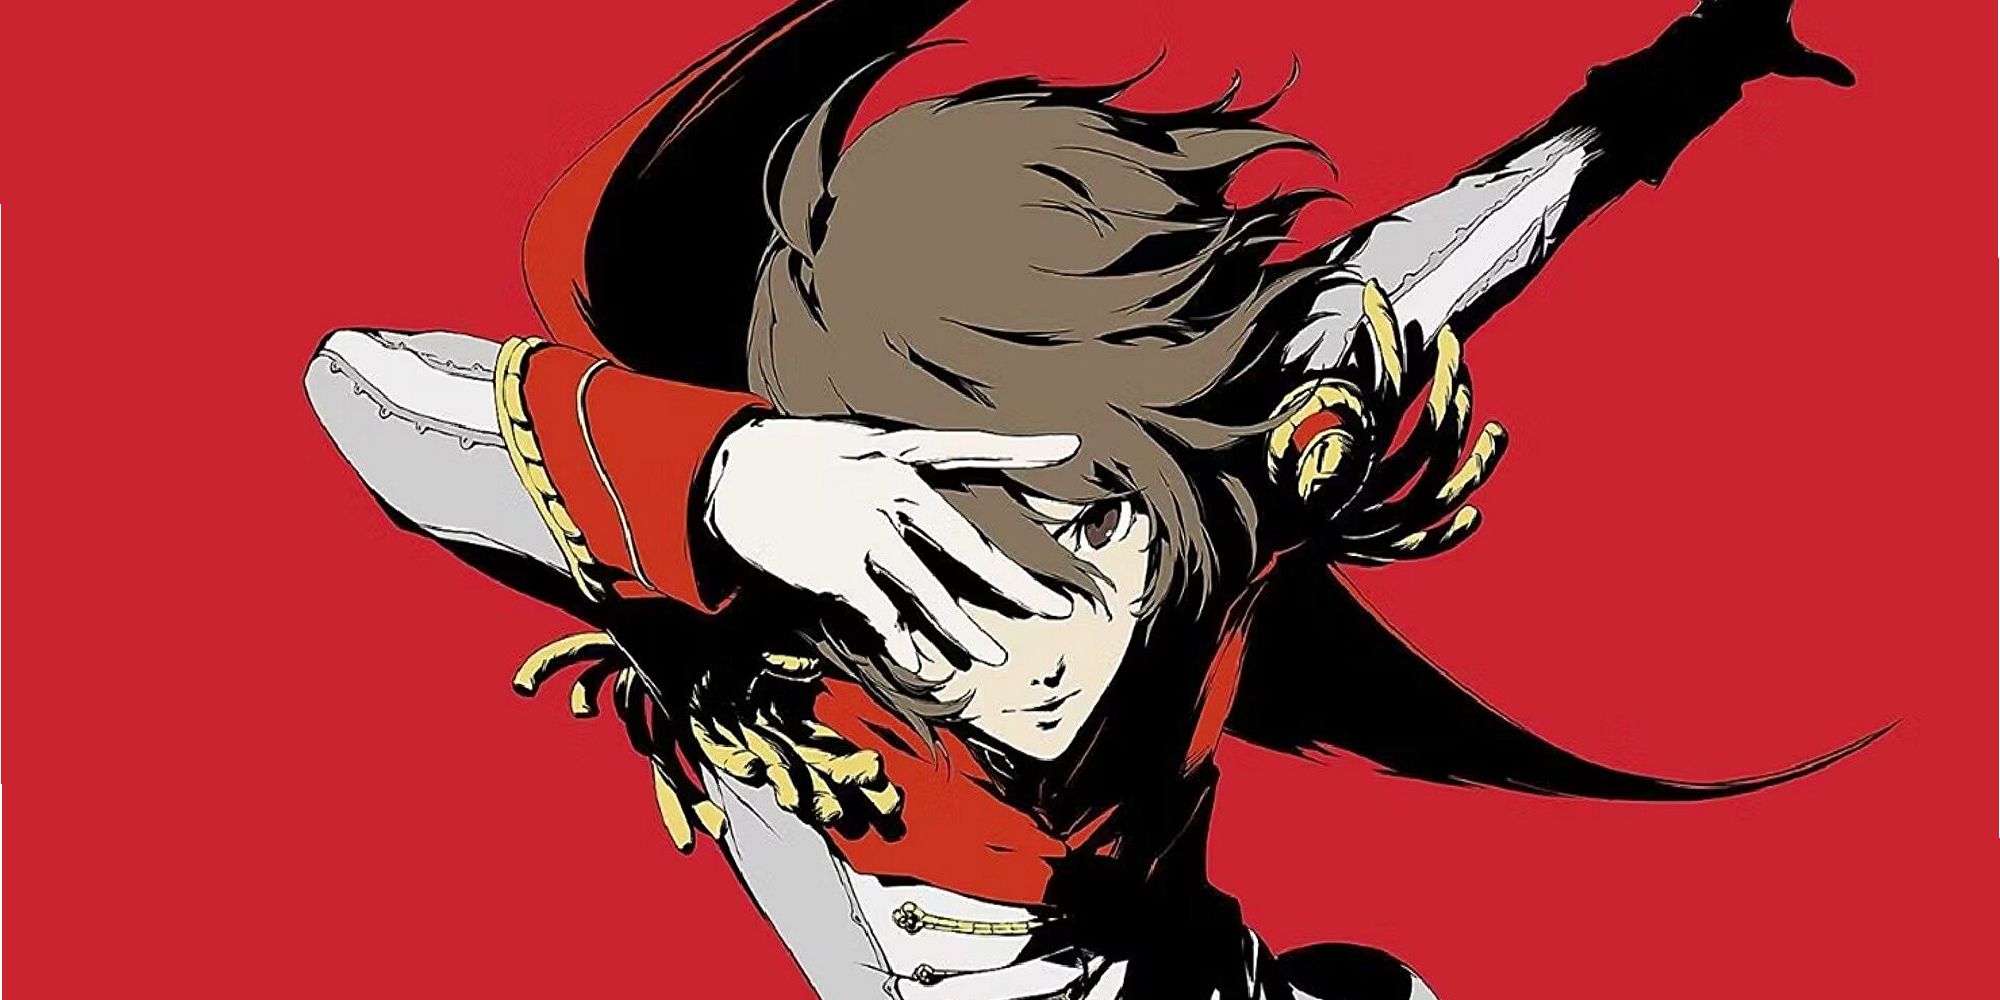 Goro Akechi in his Crow disguise, standing in a battle-ready stance against a vivid red backdrop. 